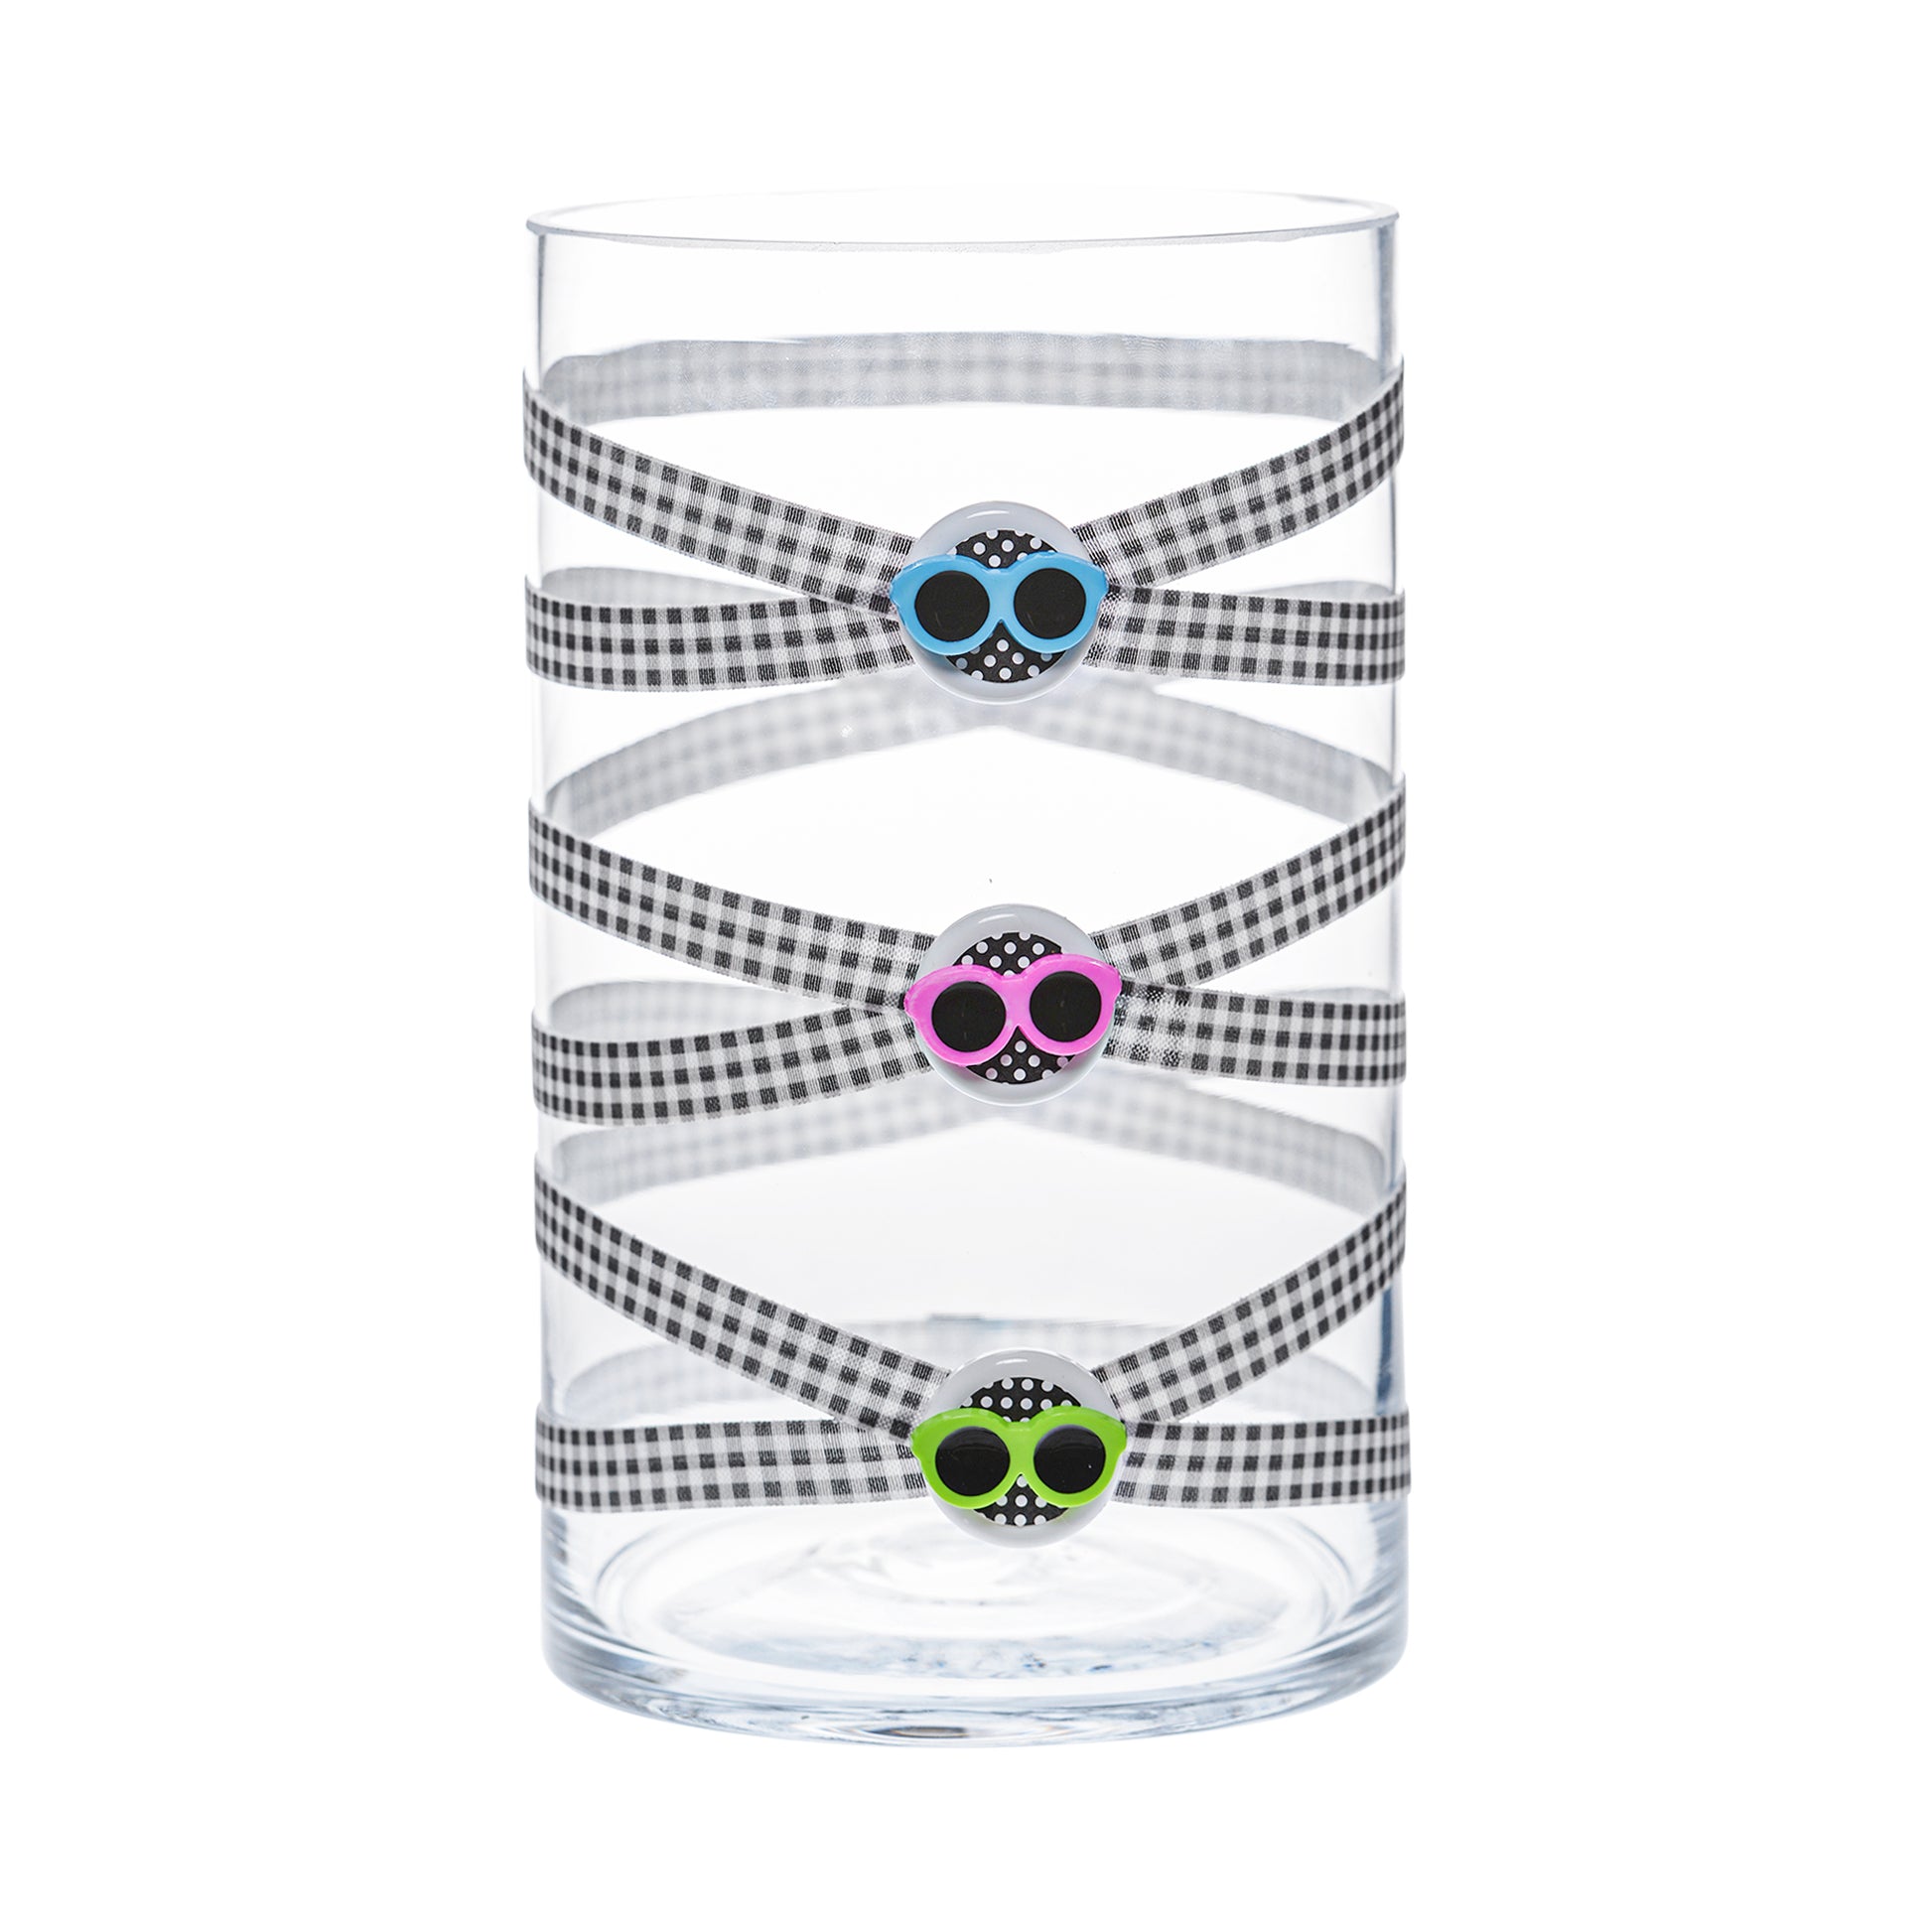 Front of Glass Wrappings 6" x 10" cylinder wrapped in black & white check elastic, decorated with 3 colorful sunglasses.